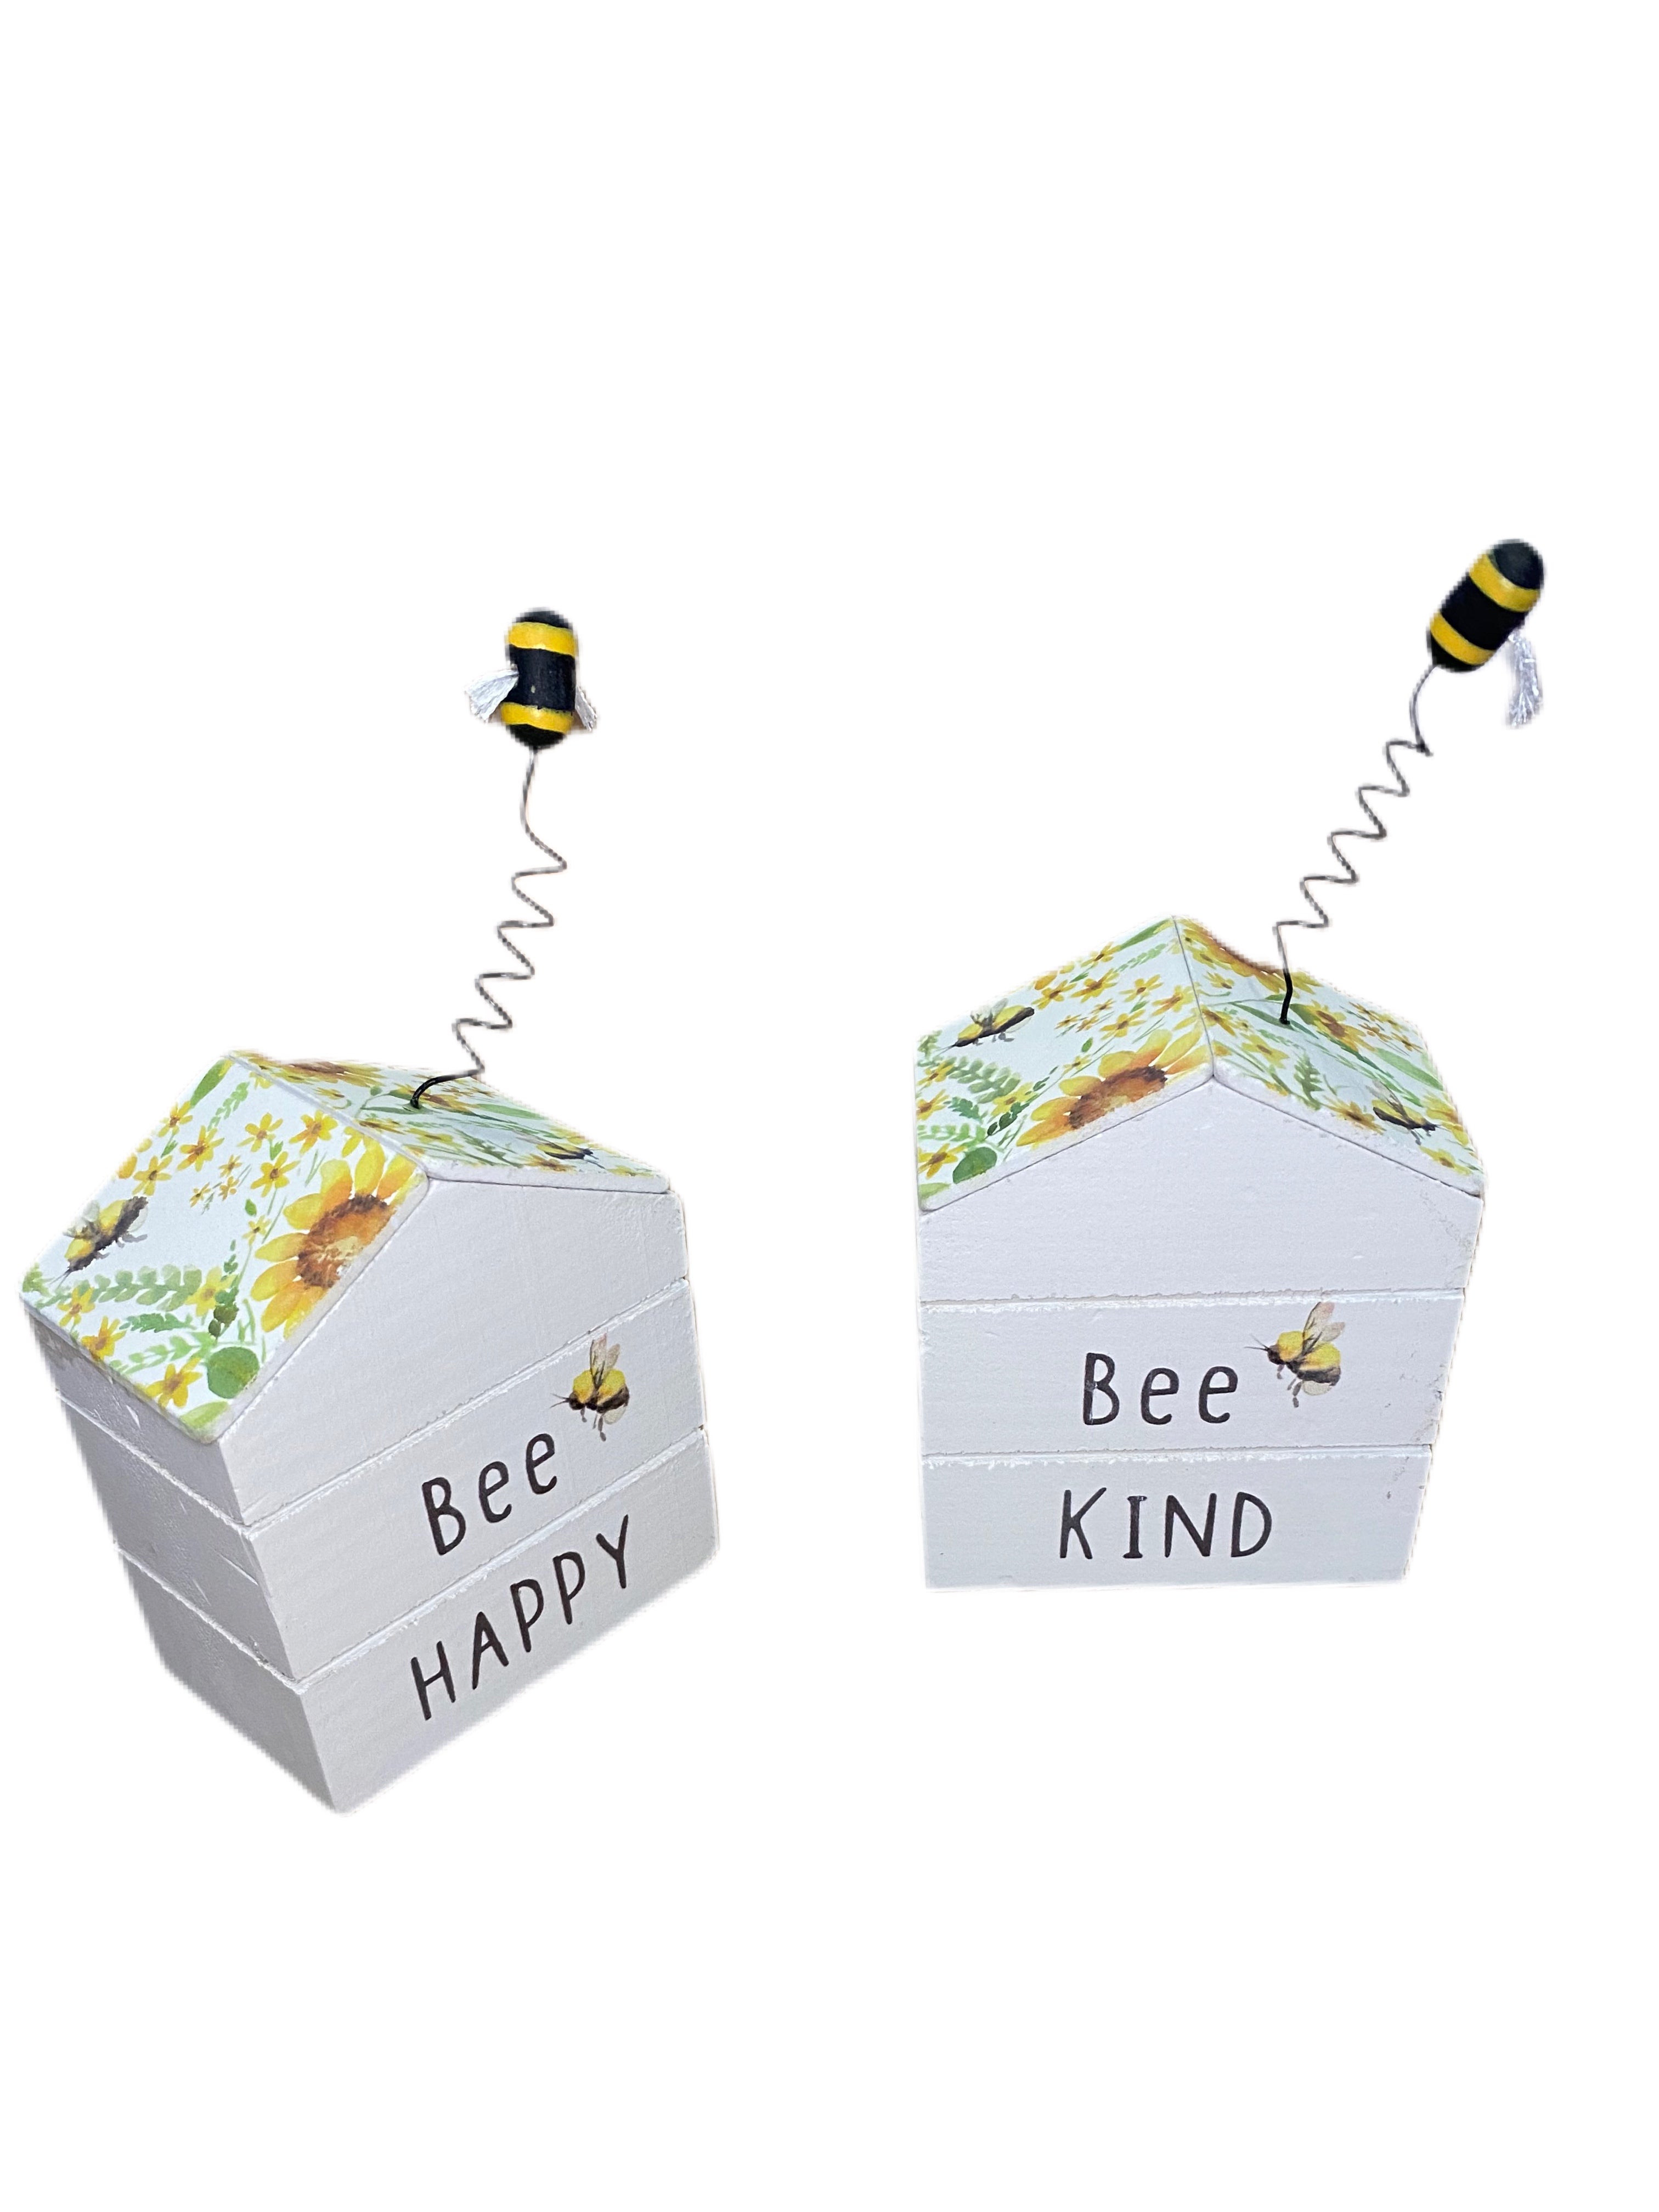 Wooden Block Bee Hive Style Standing Plaque with Bee and Sunflower Design - Sold Singly - Choose Design - Kate's Cupboard